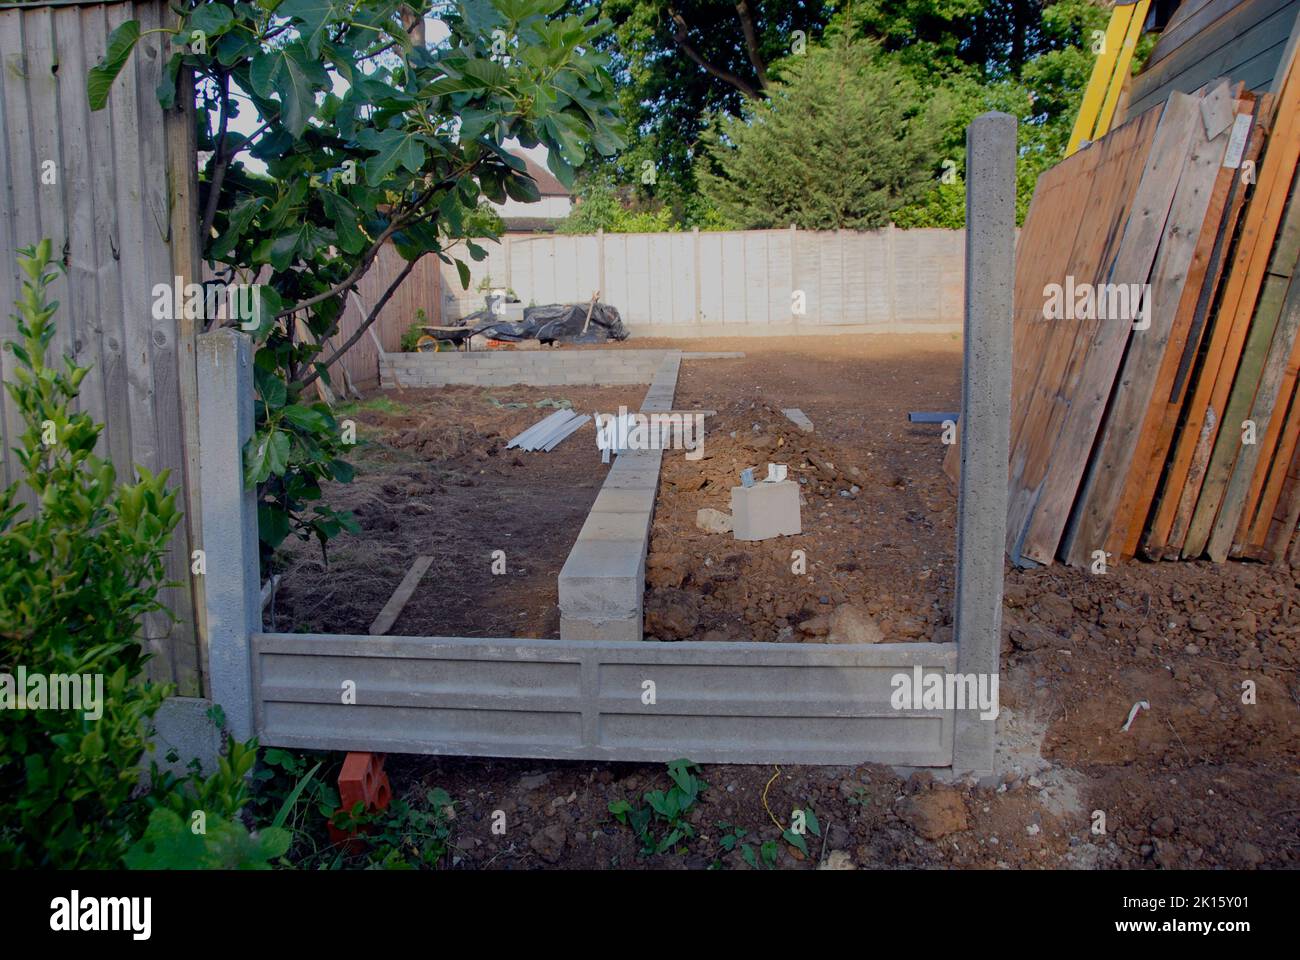 Temporary placement of a concrete gravel board during construction of  a fence Stock Photo